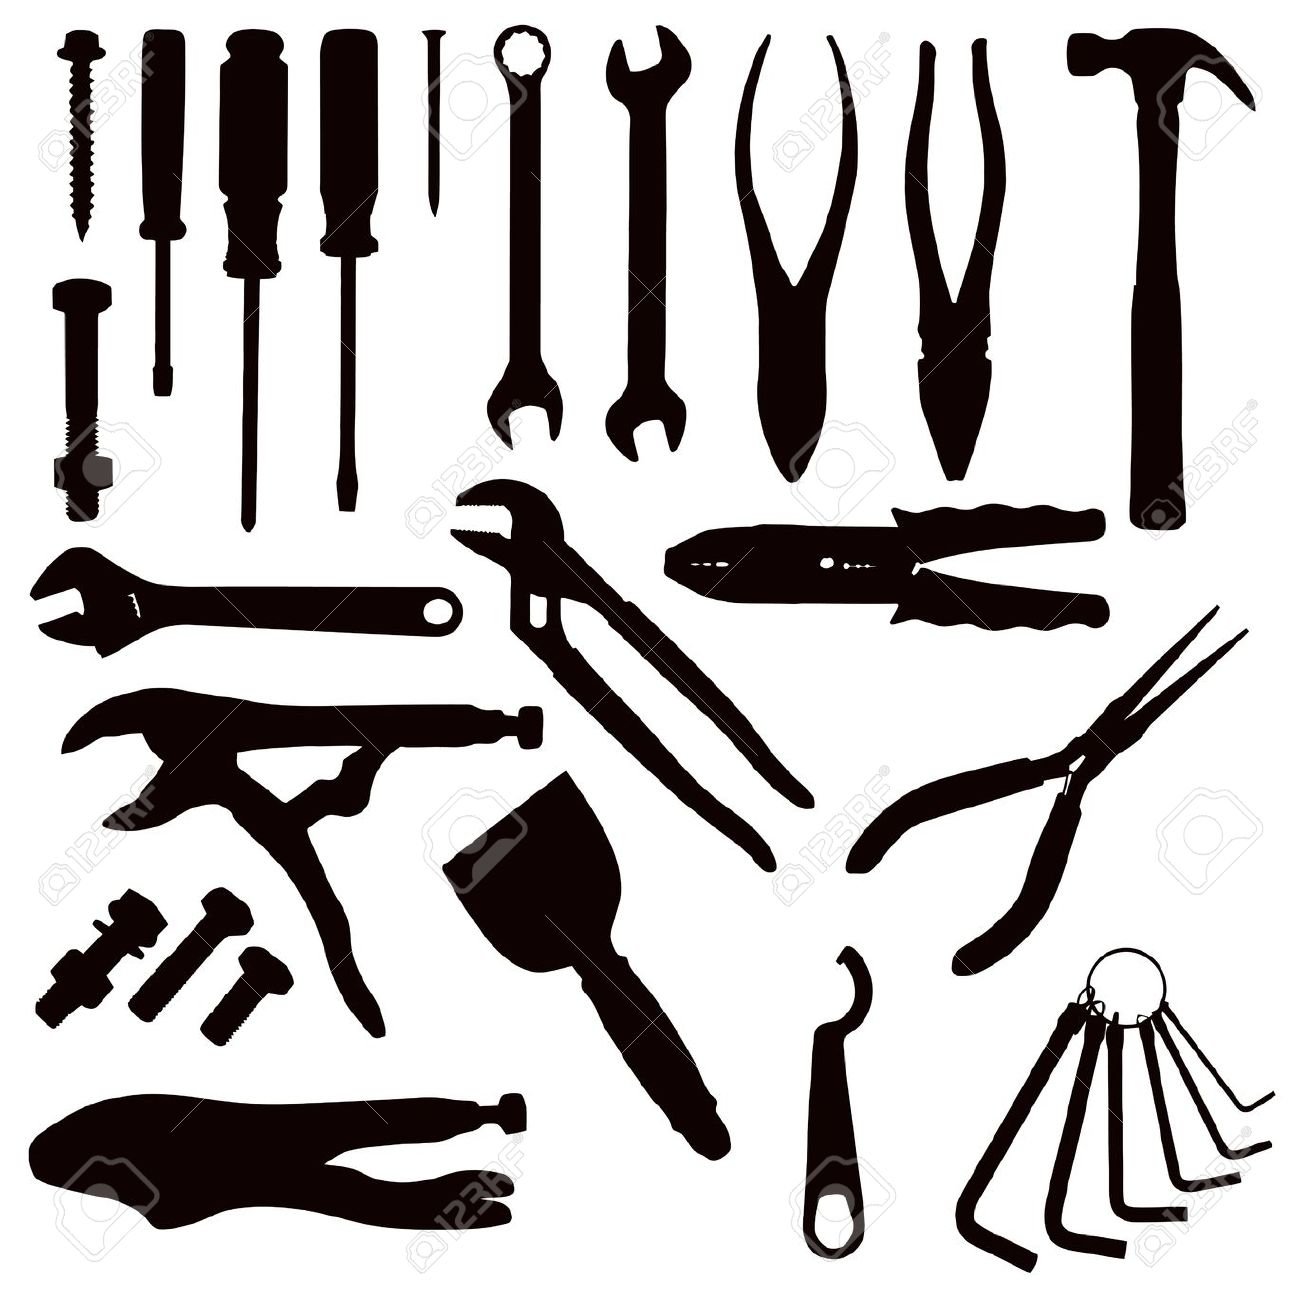 free clipart hand tools - photo #41